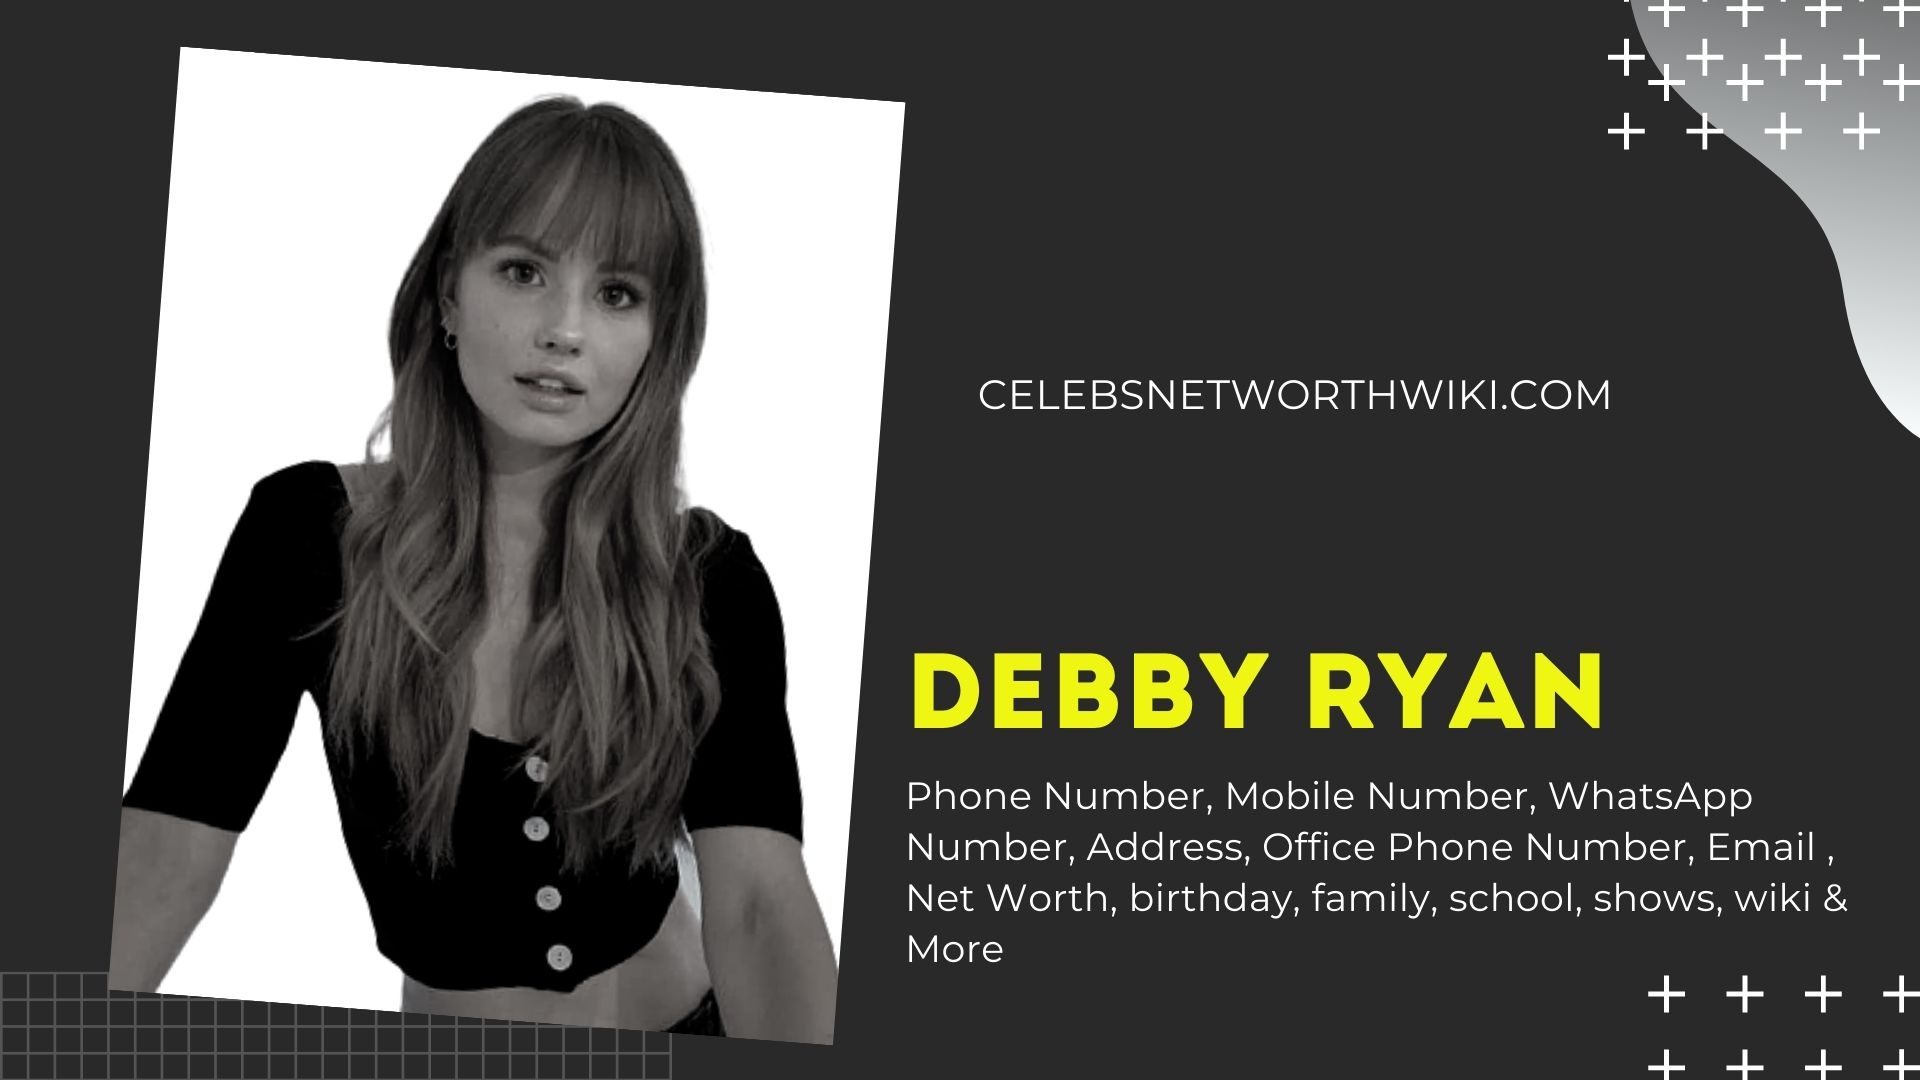 Debby Ryan Phone Number Texting Number Contact Number Mobile 